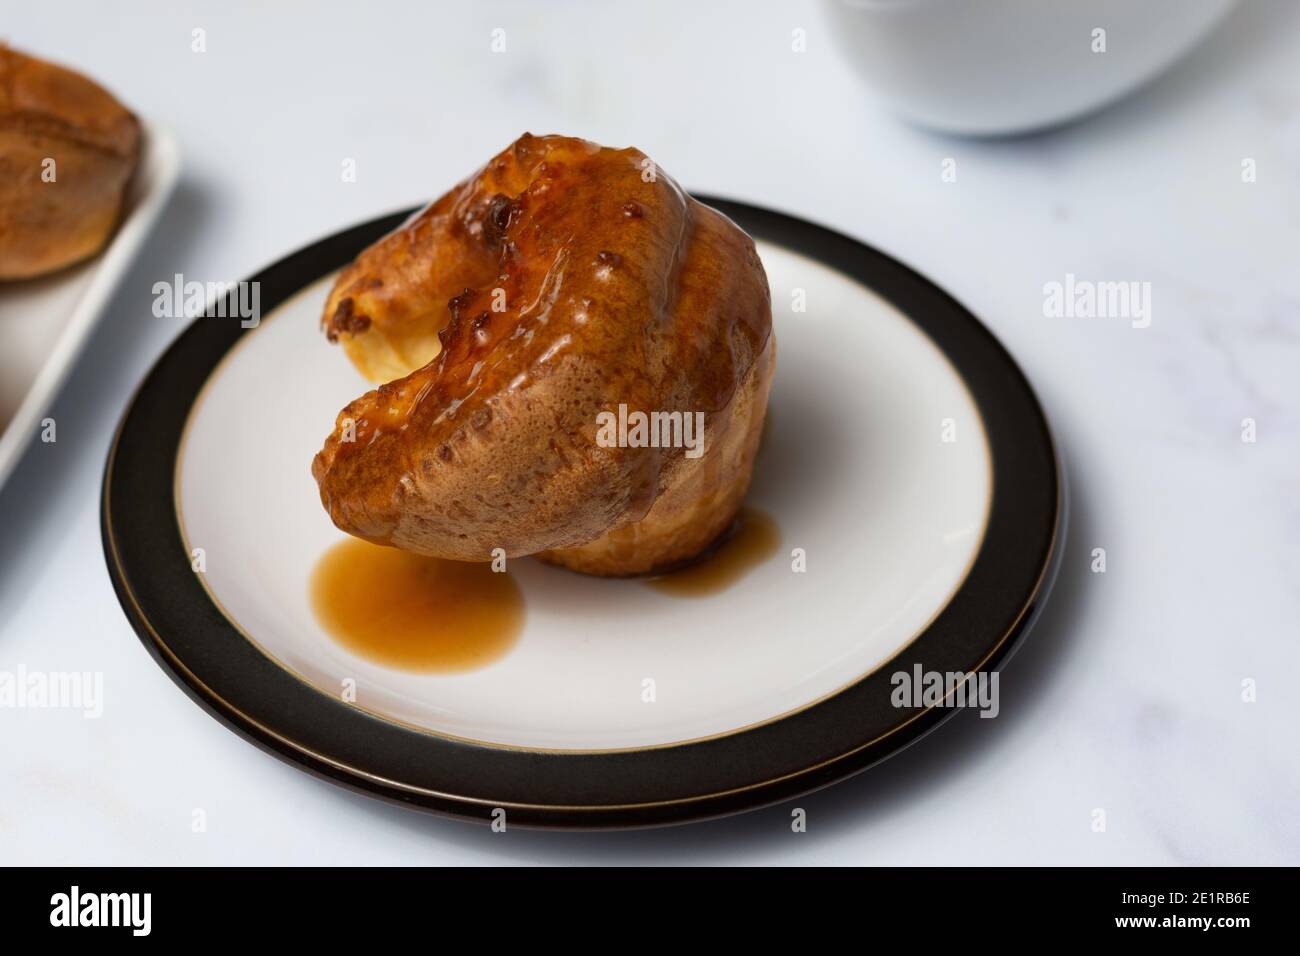 A single Yorkshire pudding covered in gravy sitting on a black rimmed plate on a white background Stock Photo